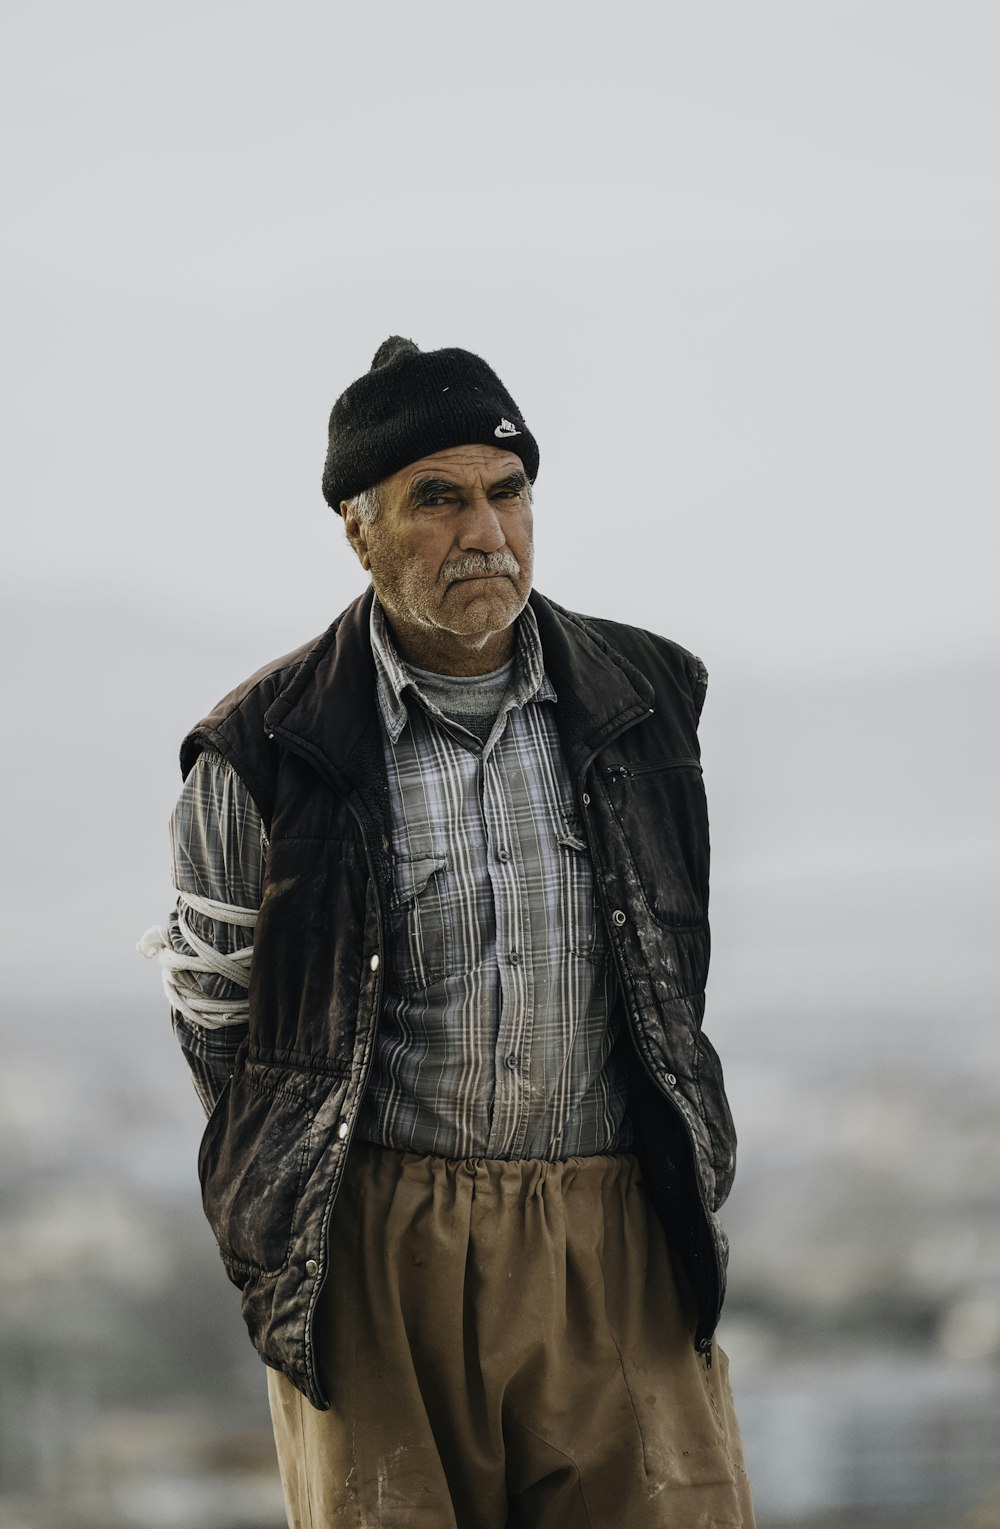 an old man wearing a hat and jacket